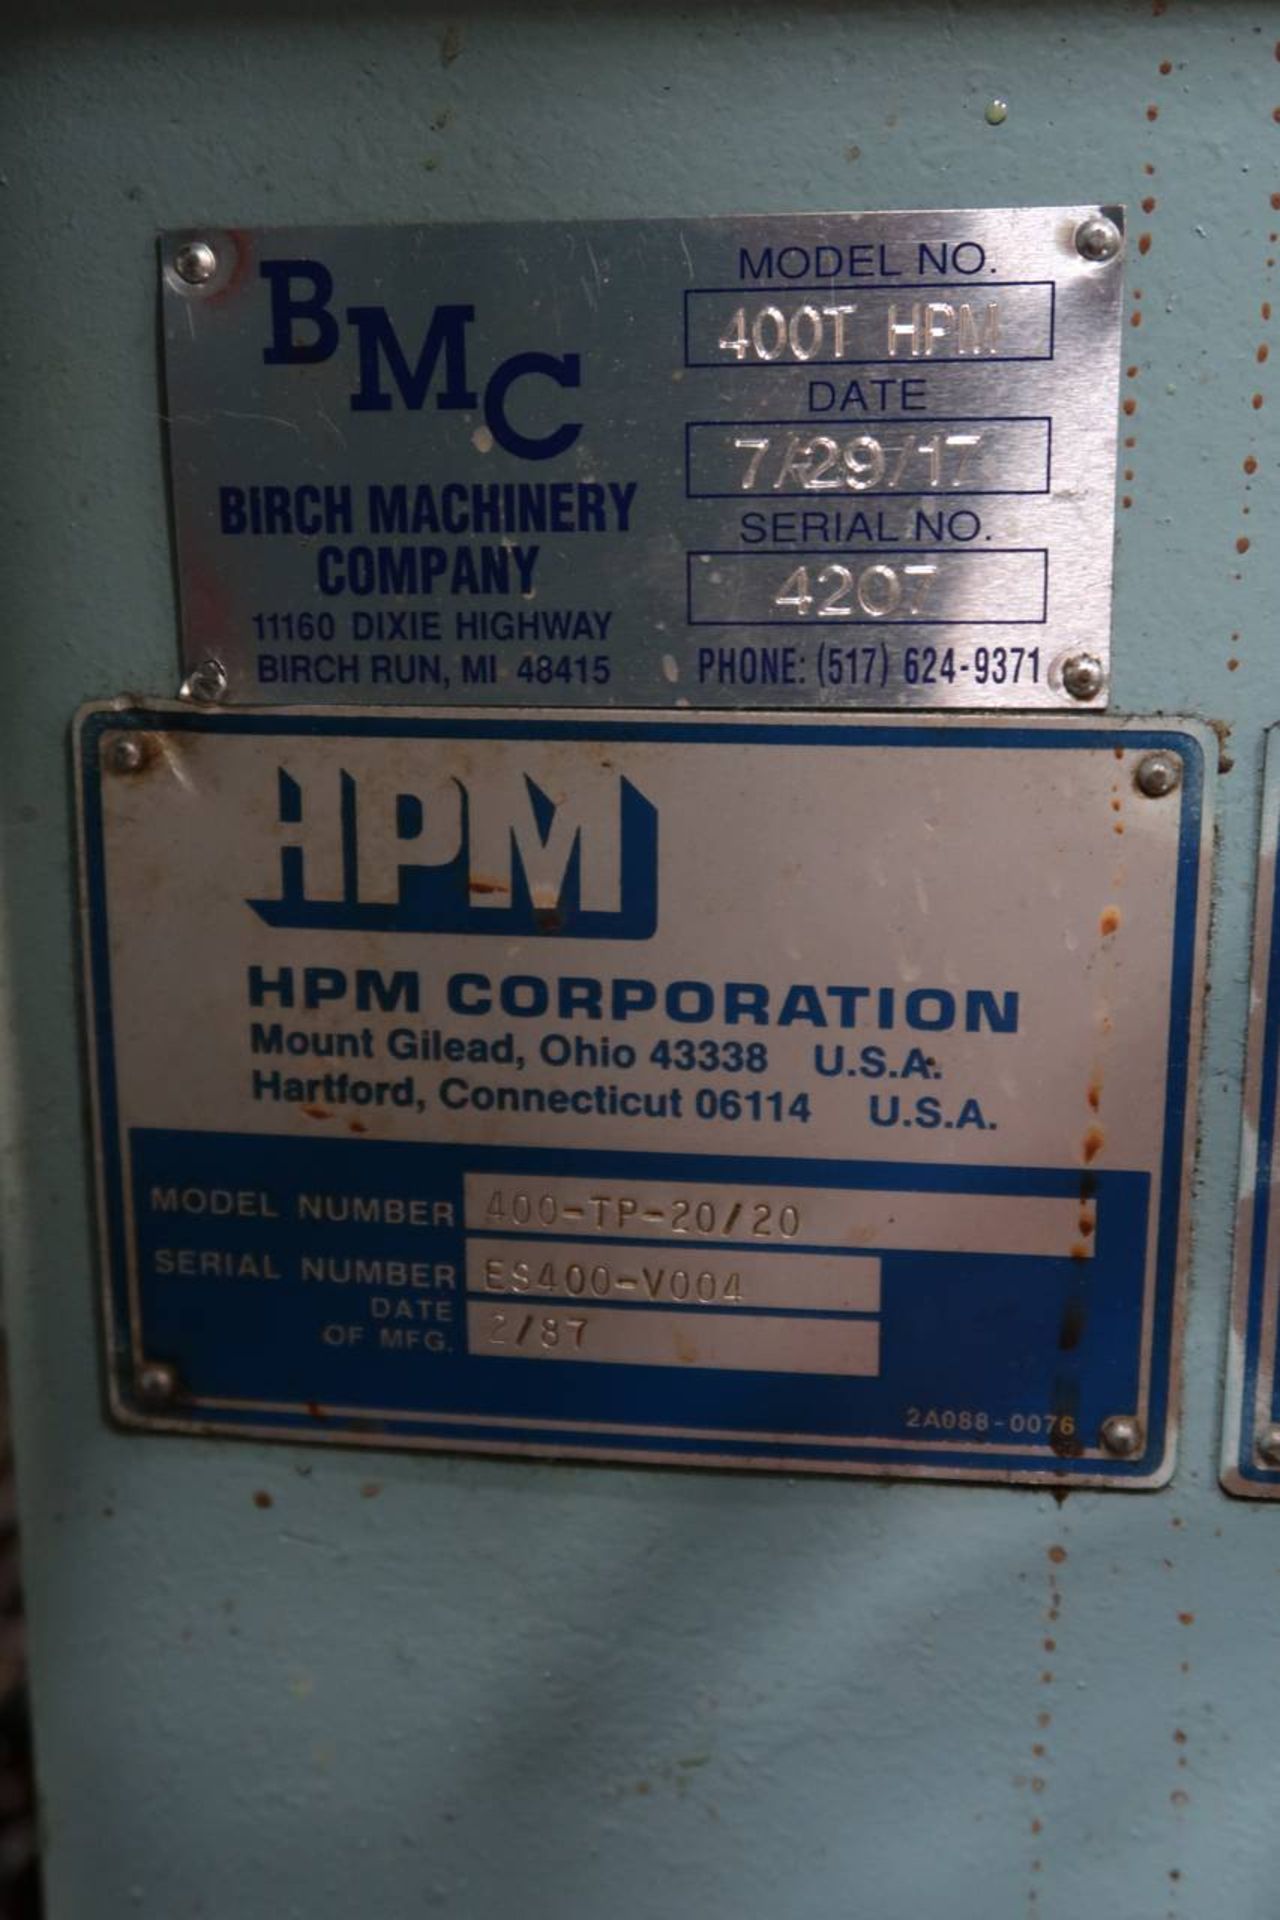 1987 HPM 400-TP-20 400-Ton Thermo Plastic Injection Molding Press - Image 20 of 34